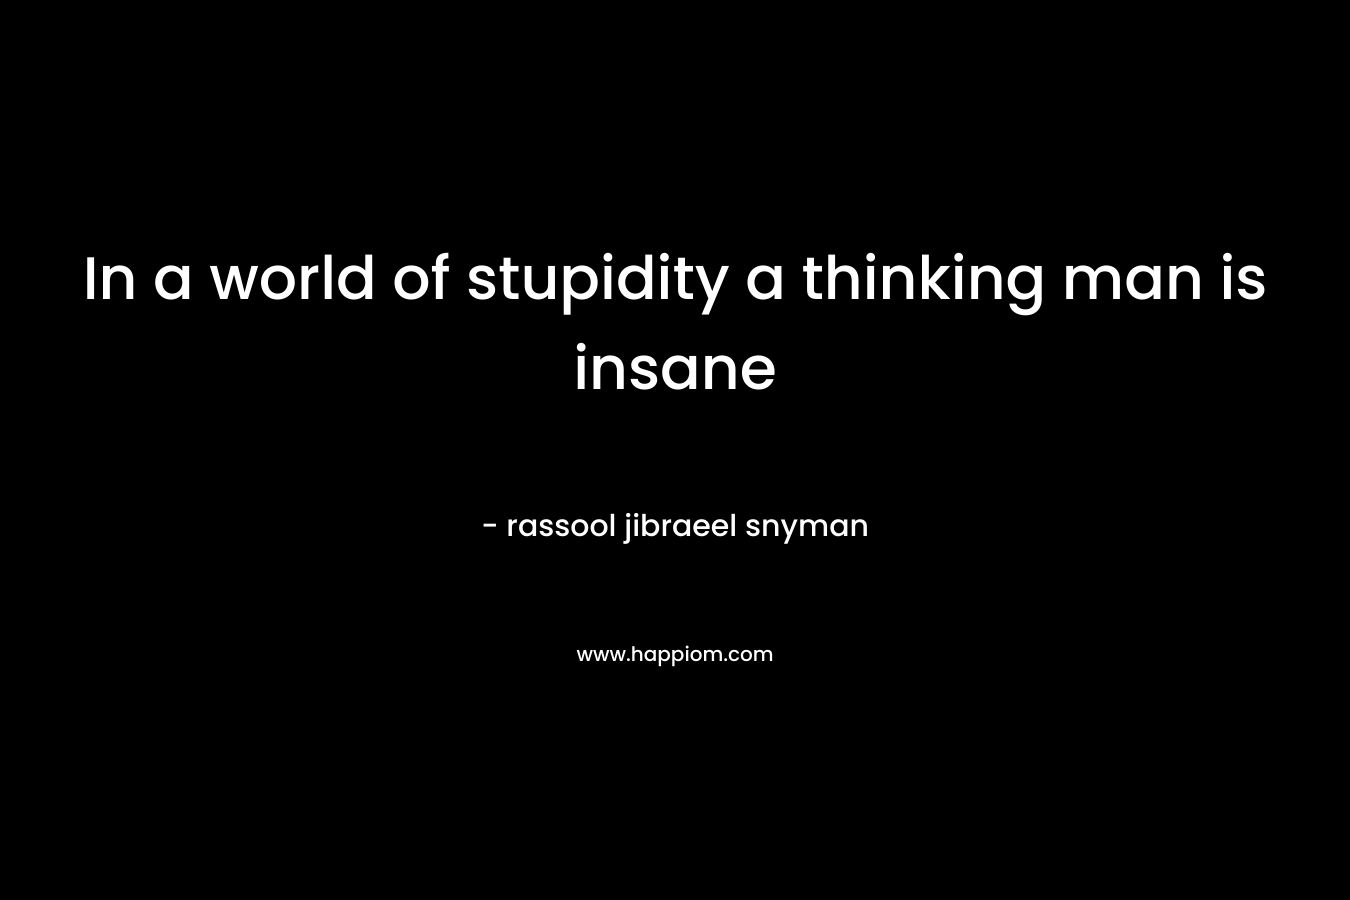 In a world of stupidity a thinking man is insane